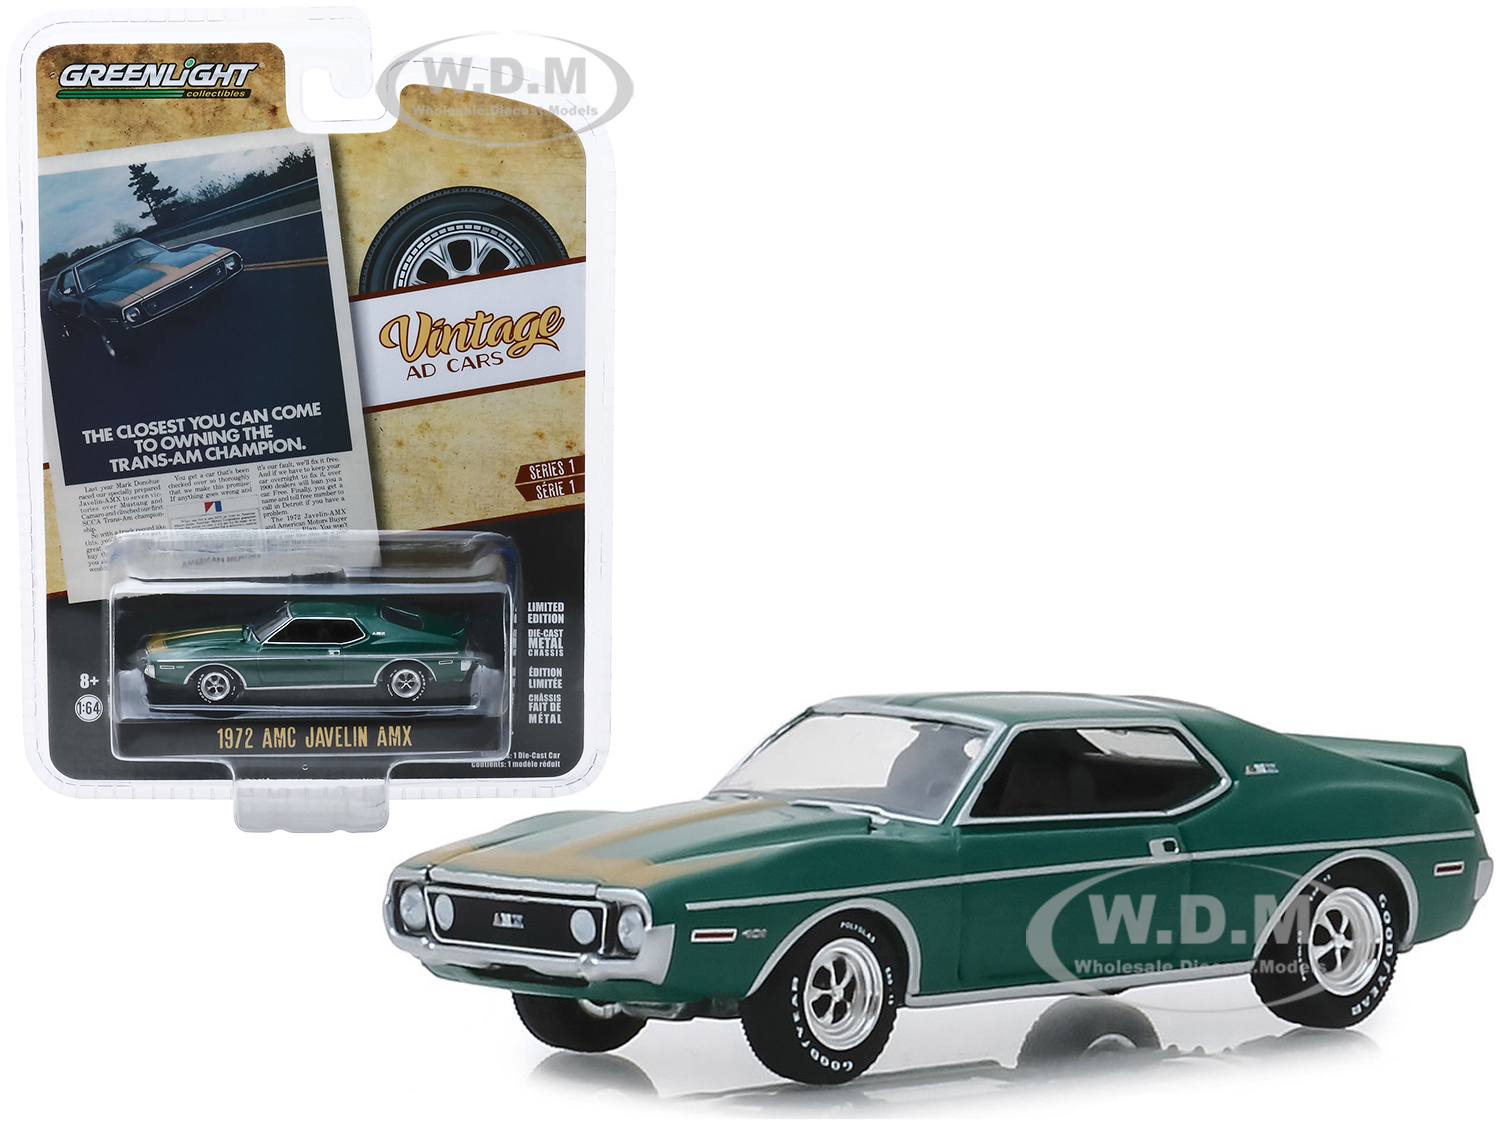 1972 Amc Javelin Amx Green With Gold Stripes "the Closest You Can Come To Owning The Trans-am Champion" "vintage Ad Cars" Series 1 1/64 Diecast Model